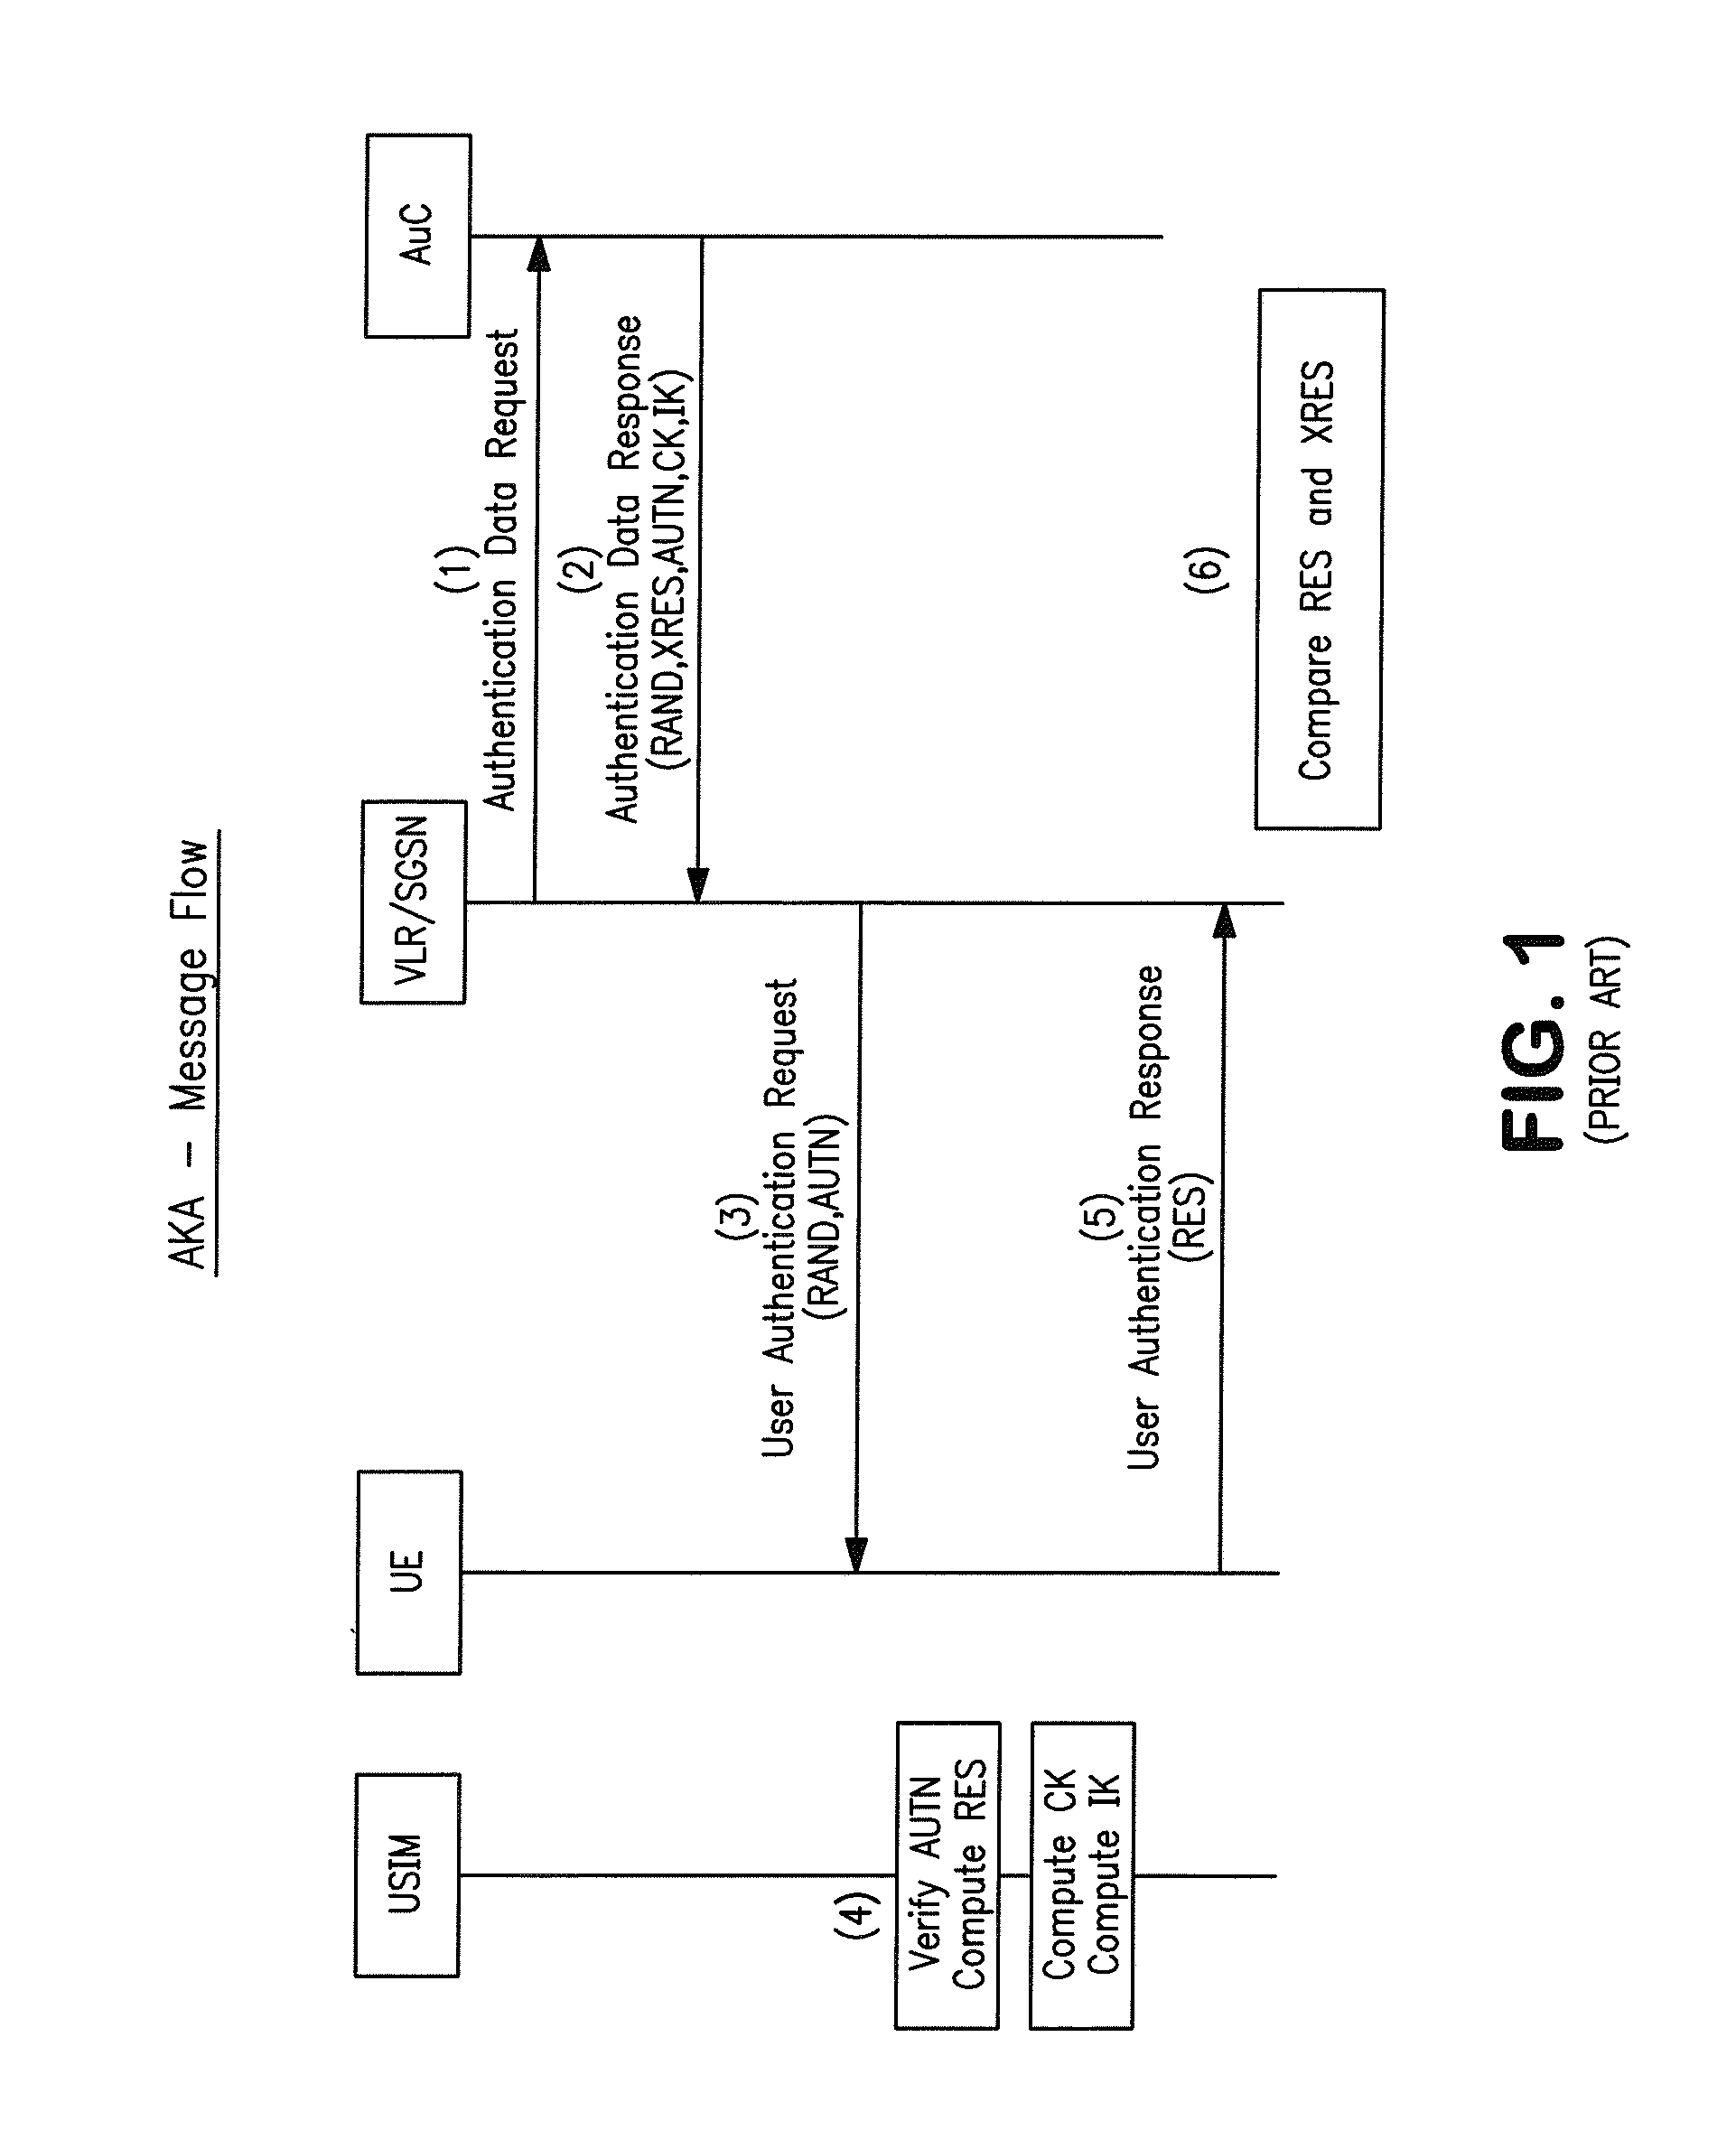 Simulacrum of physical security device and methods